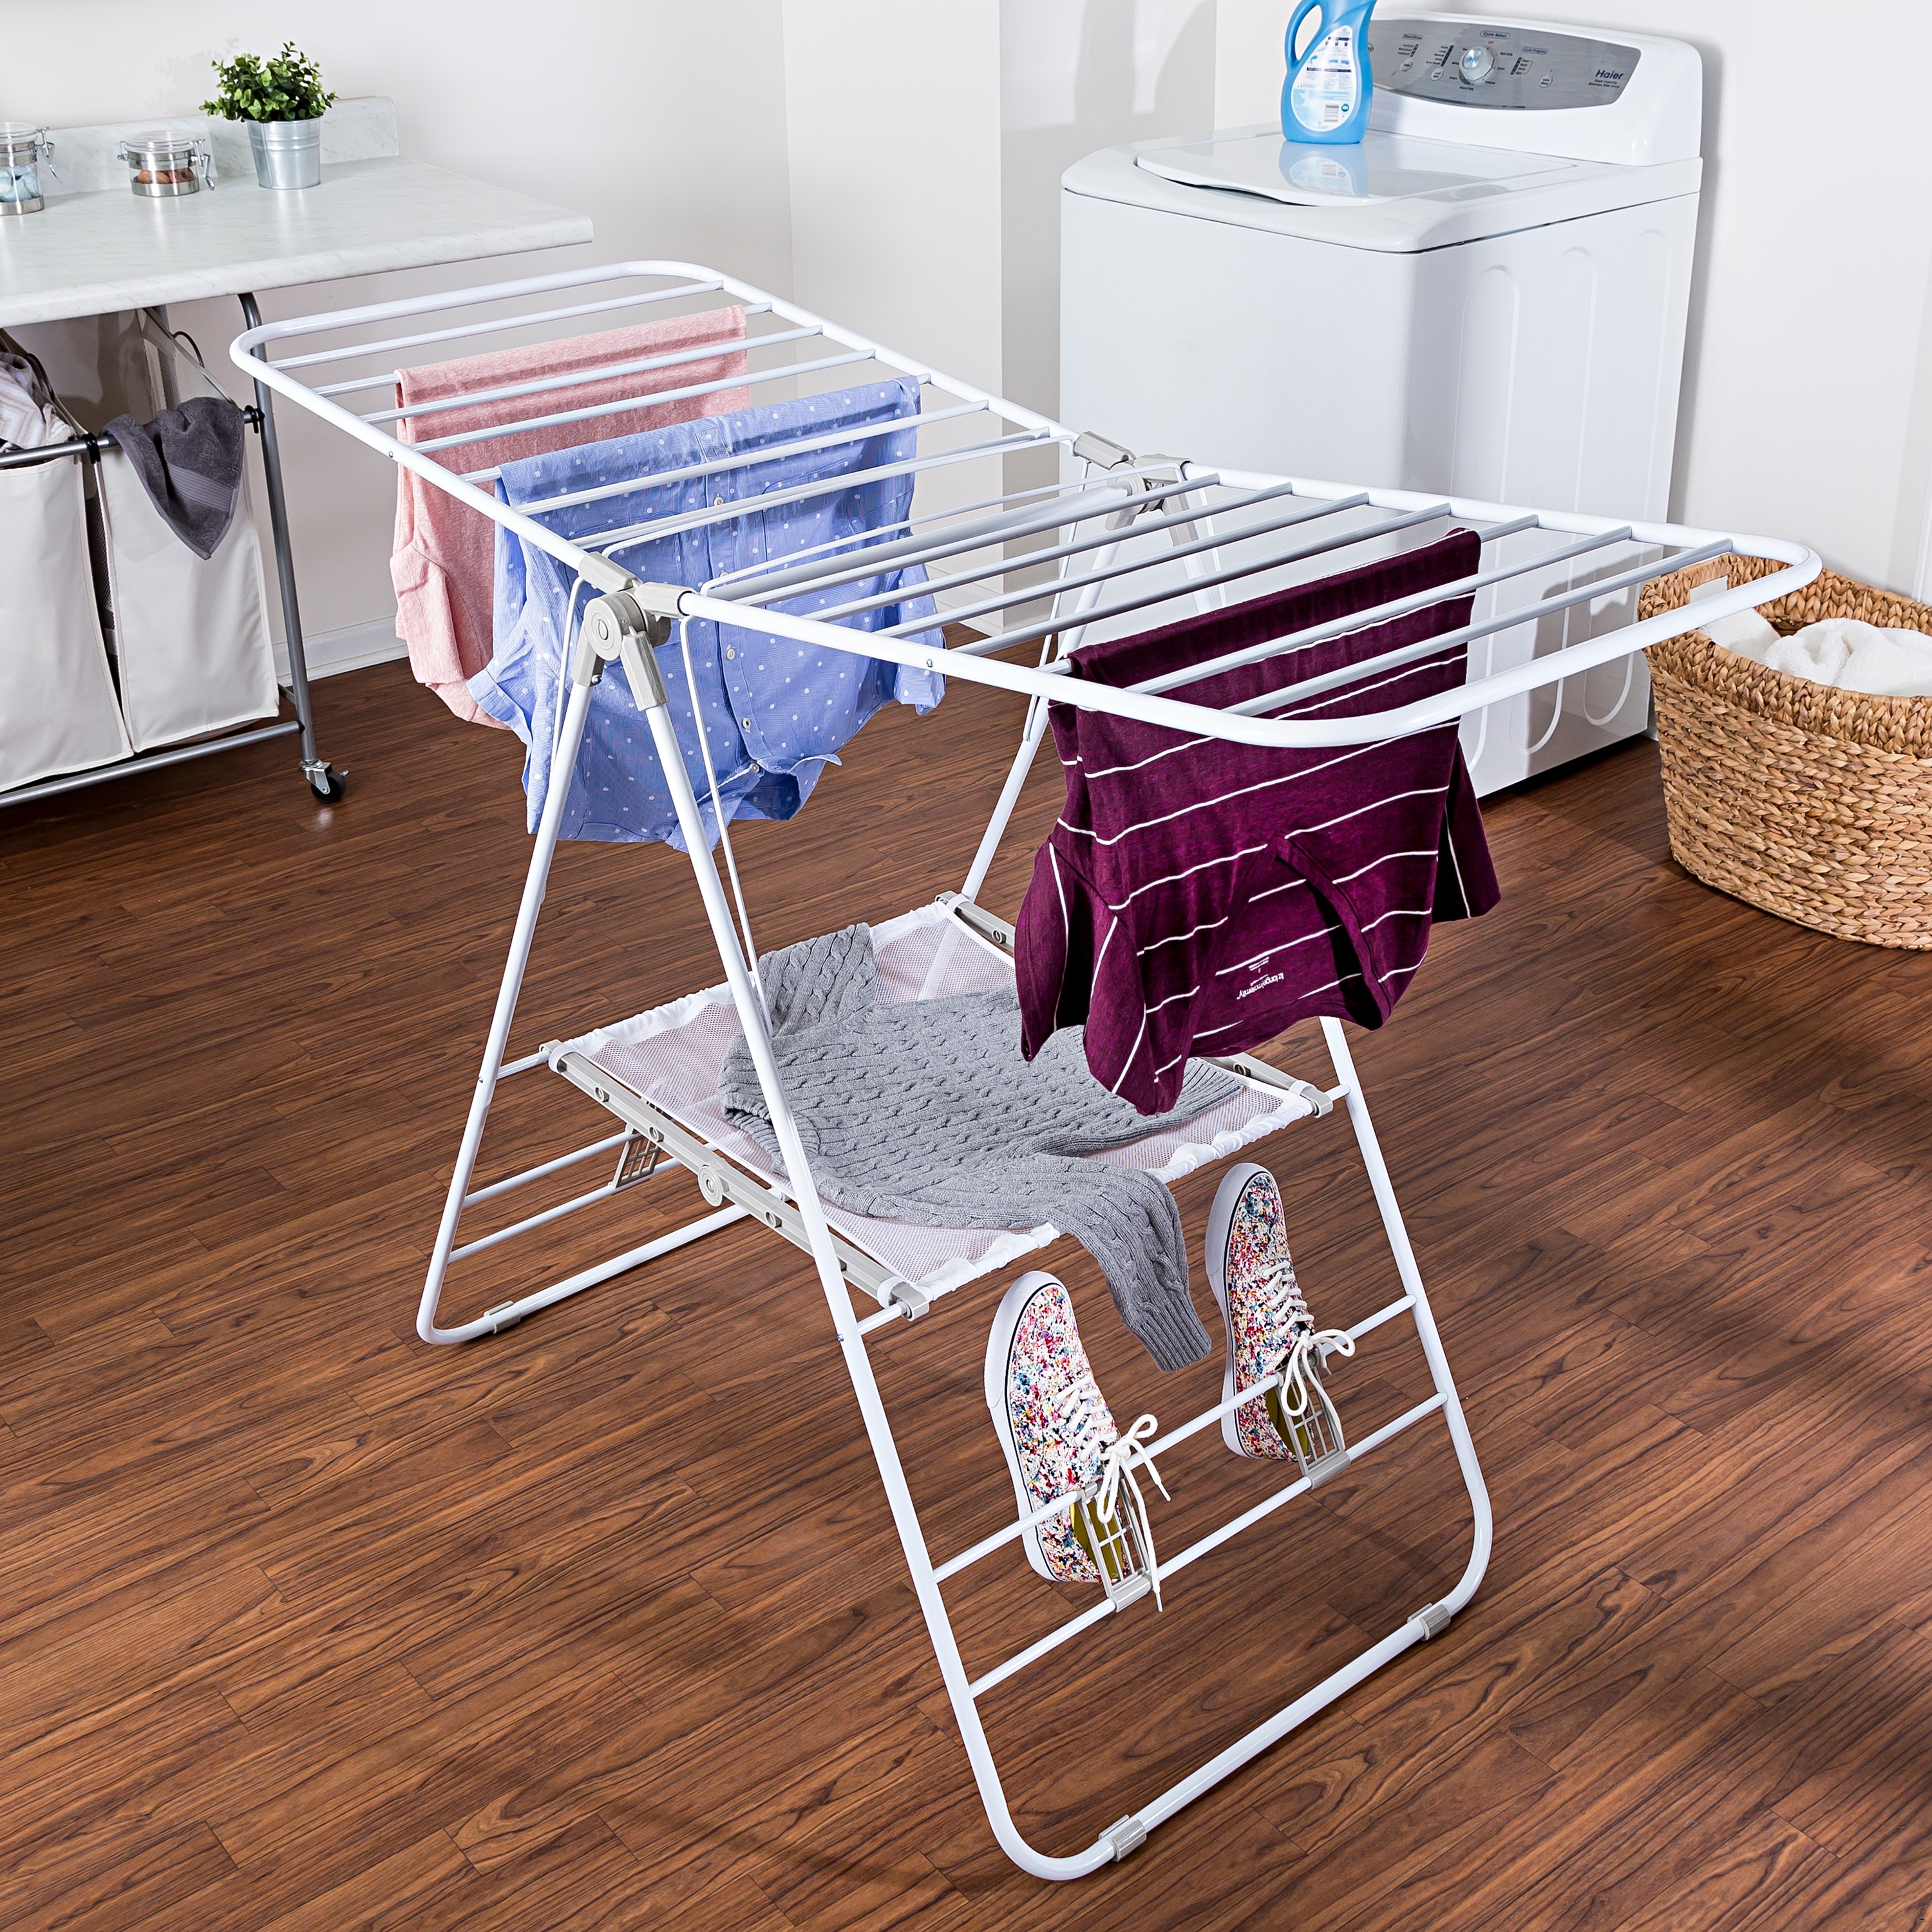 TOOLF Foldable Clothes Drying Rack, 4-Tier Drying Rack Clothing, Laundry  Drying Rack with Foldable Wings, Space Saving Laundry Rack, Pink